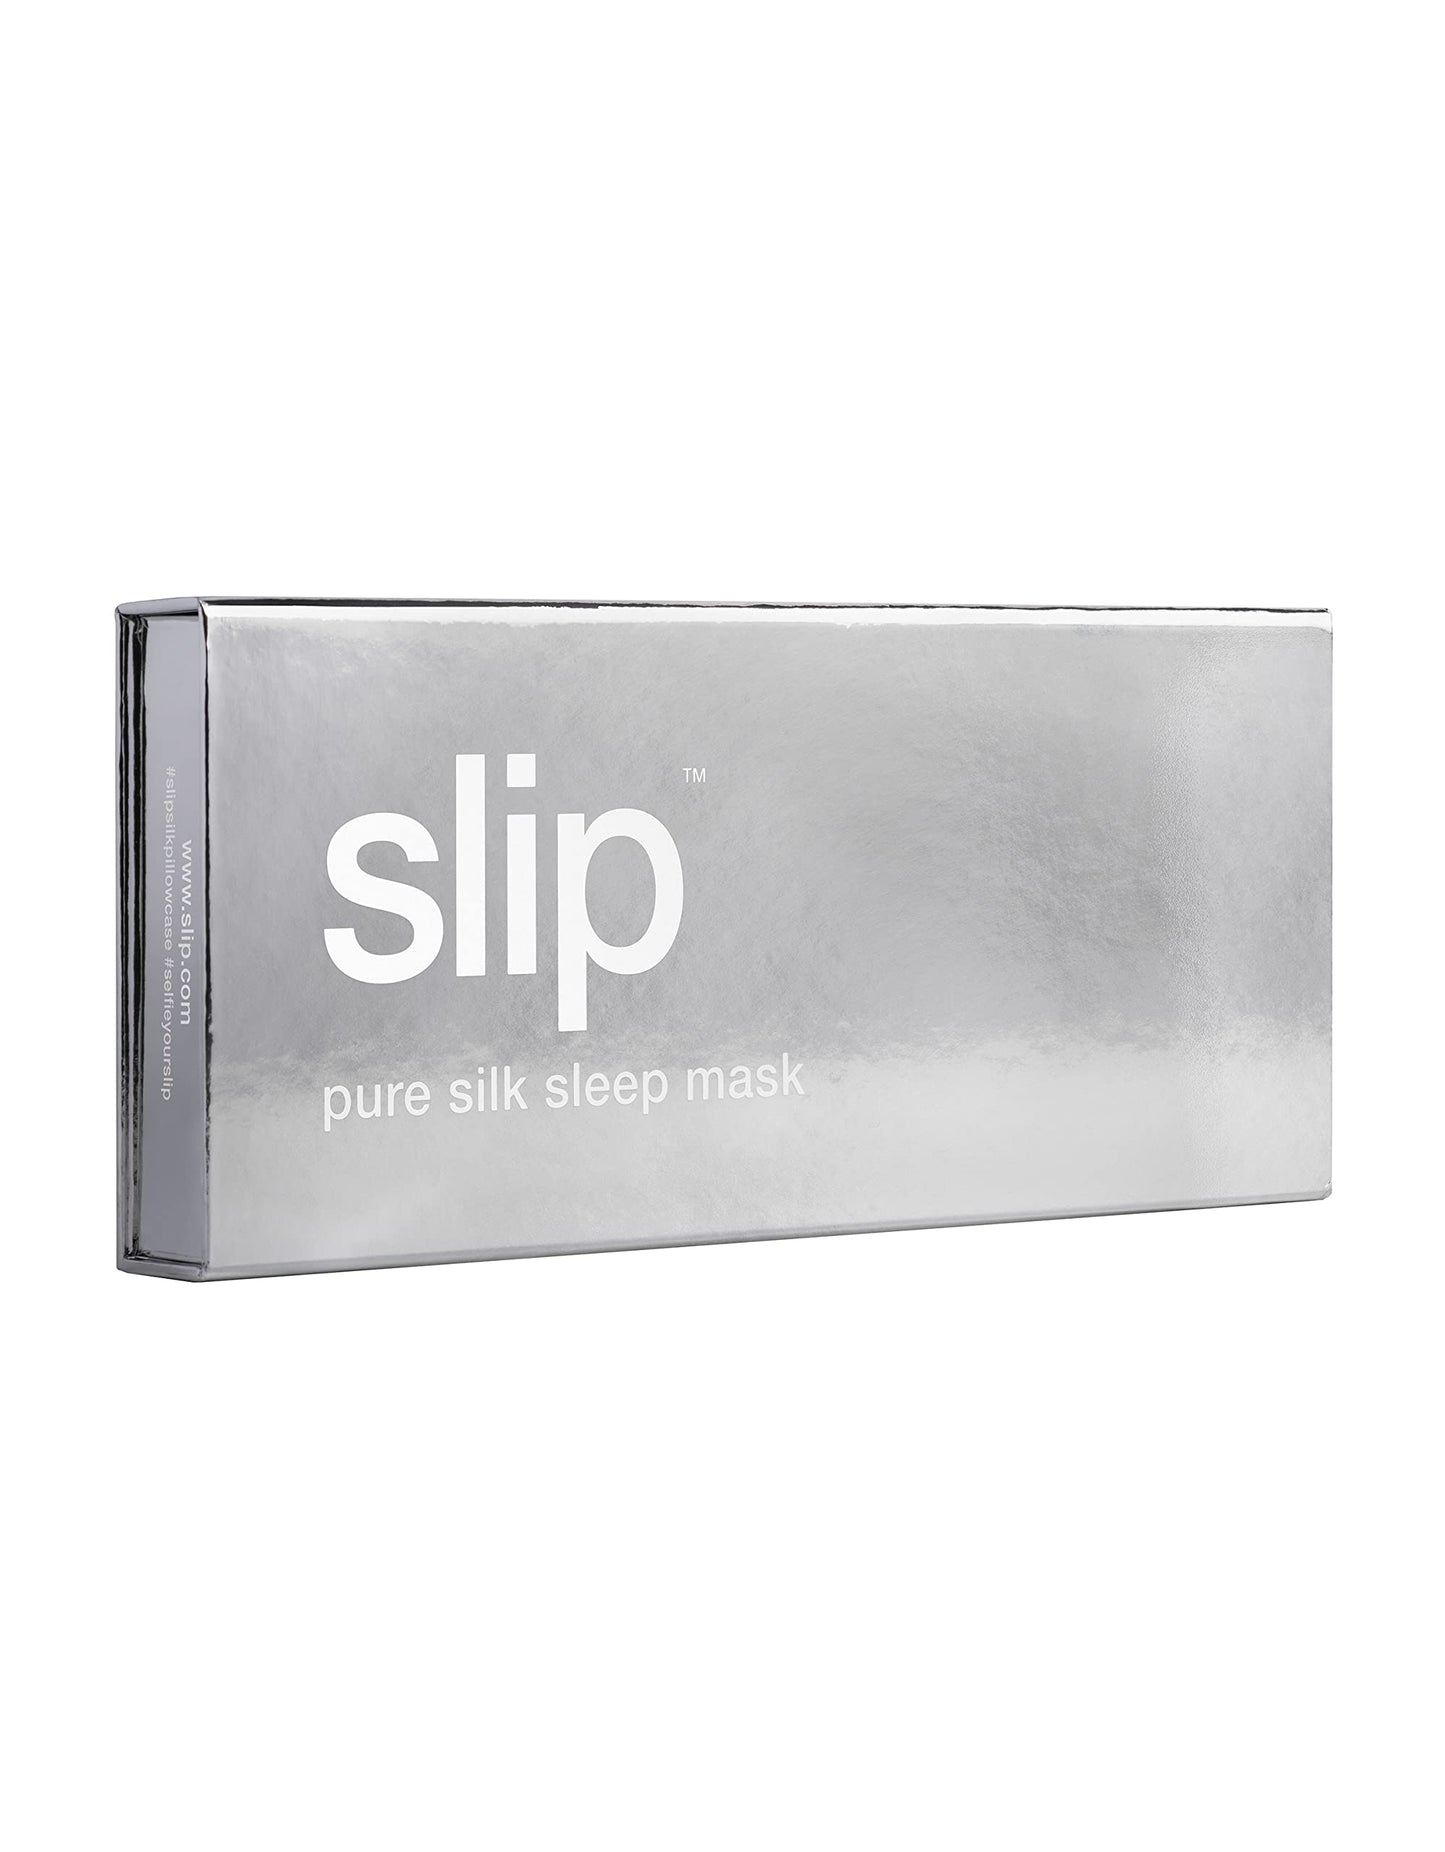 Slip Silk Sleep Mask, Black (One Size) - 100% Pure Mulberry 22 Momme Silk Eye Mask - Comfortable Sleeping Mask with Elastic Band + Pure Silk Filler and Internal Liner